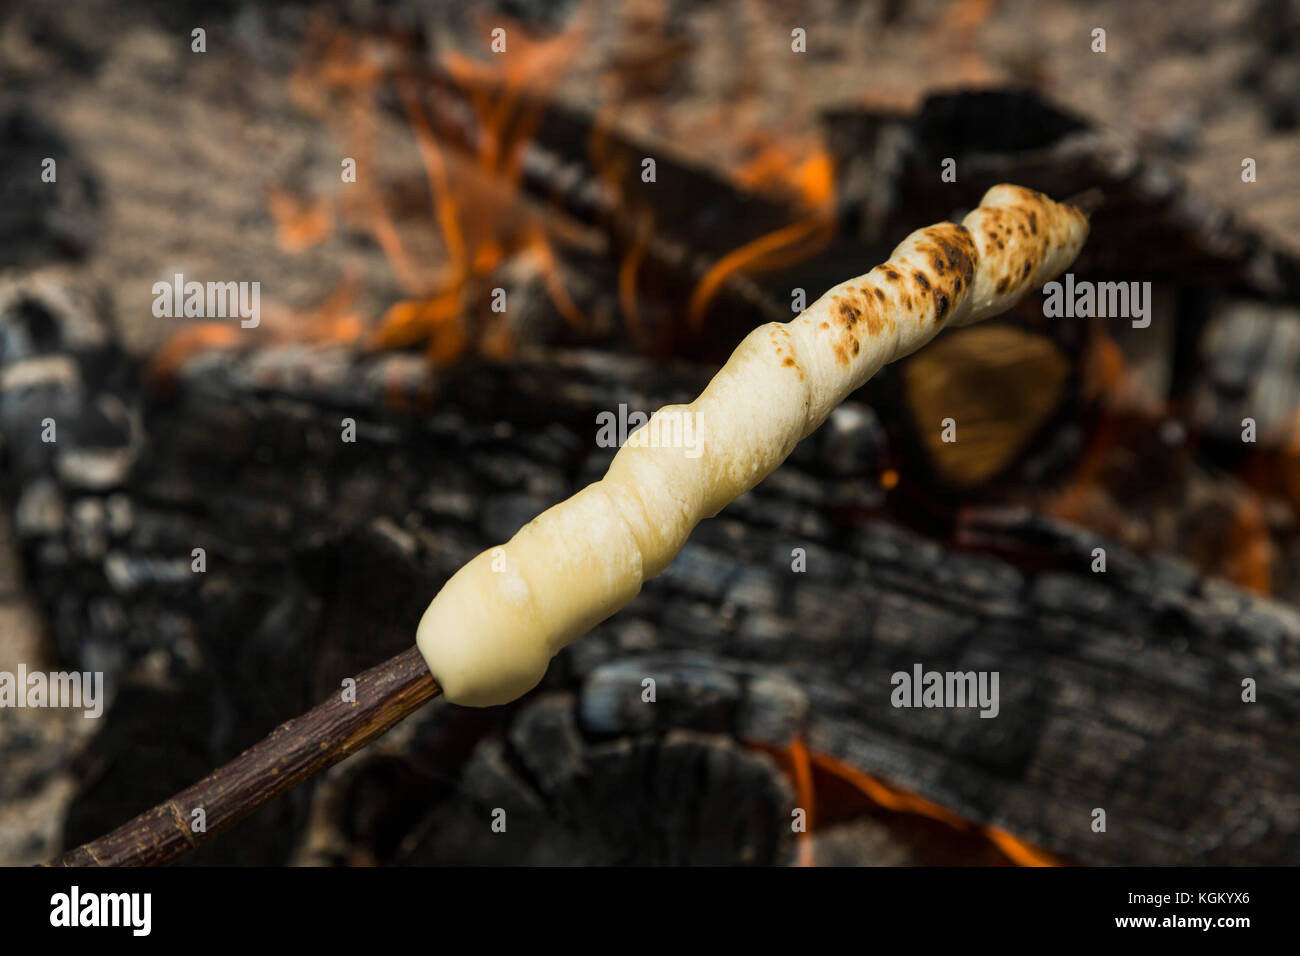 High angle view of dough on wooden skewer over fire Stock Photo